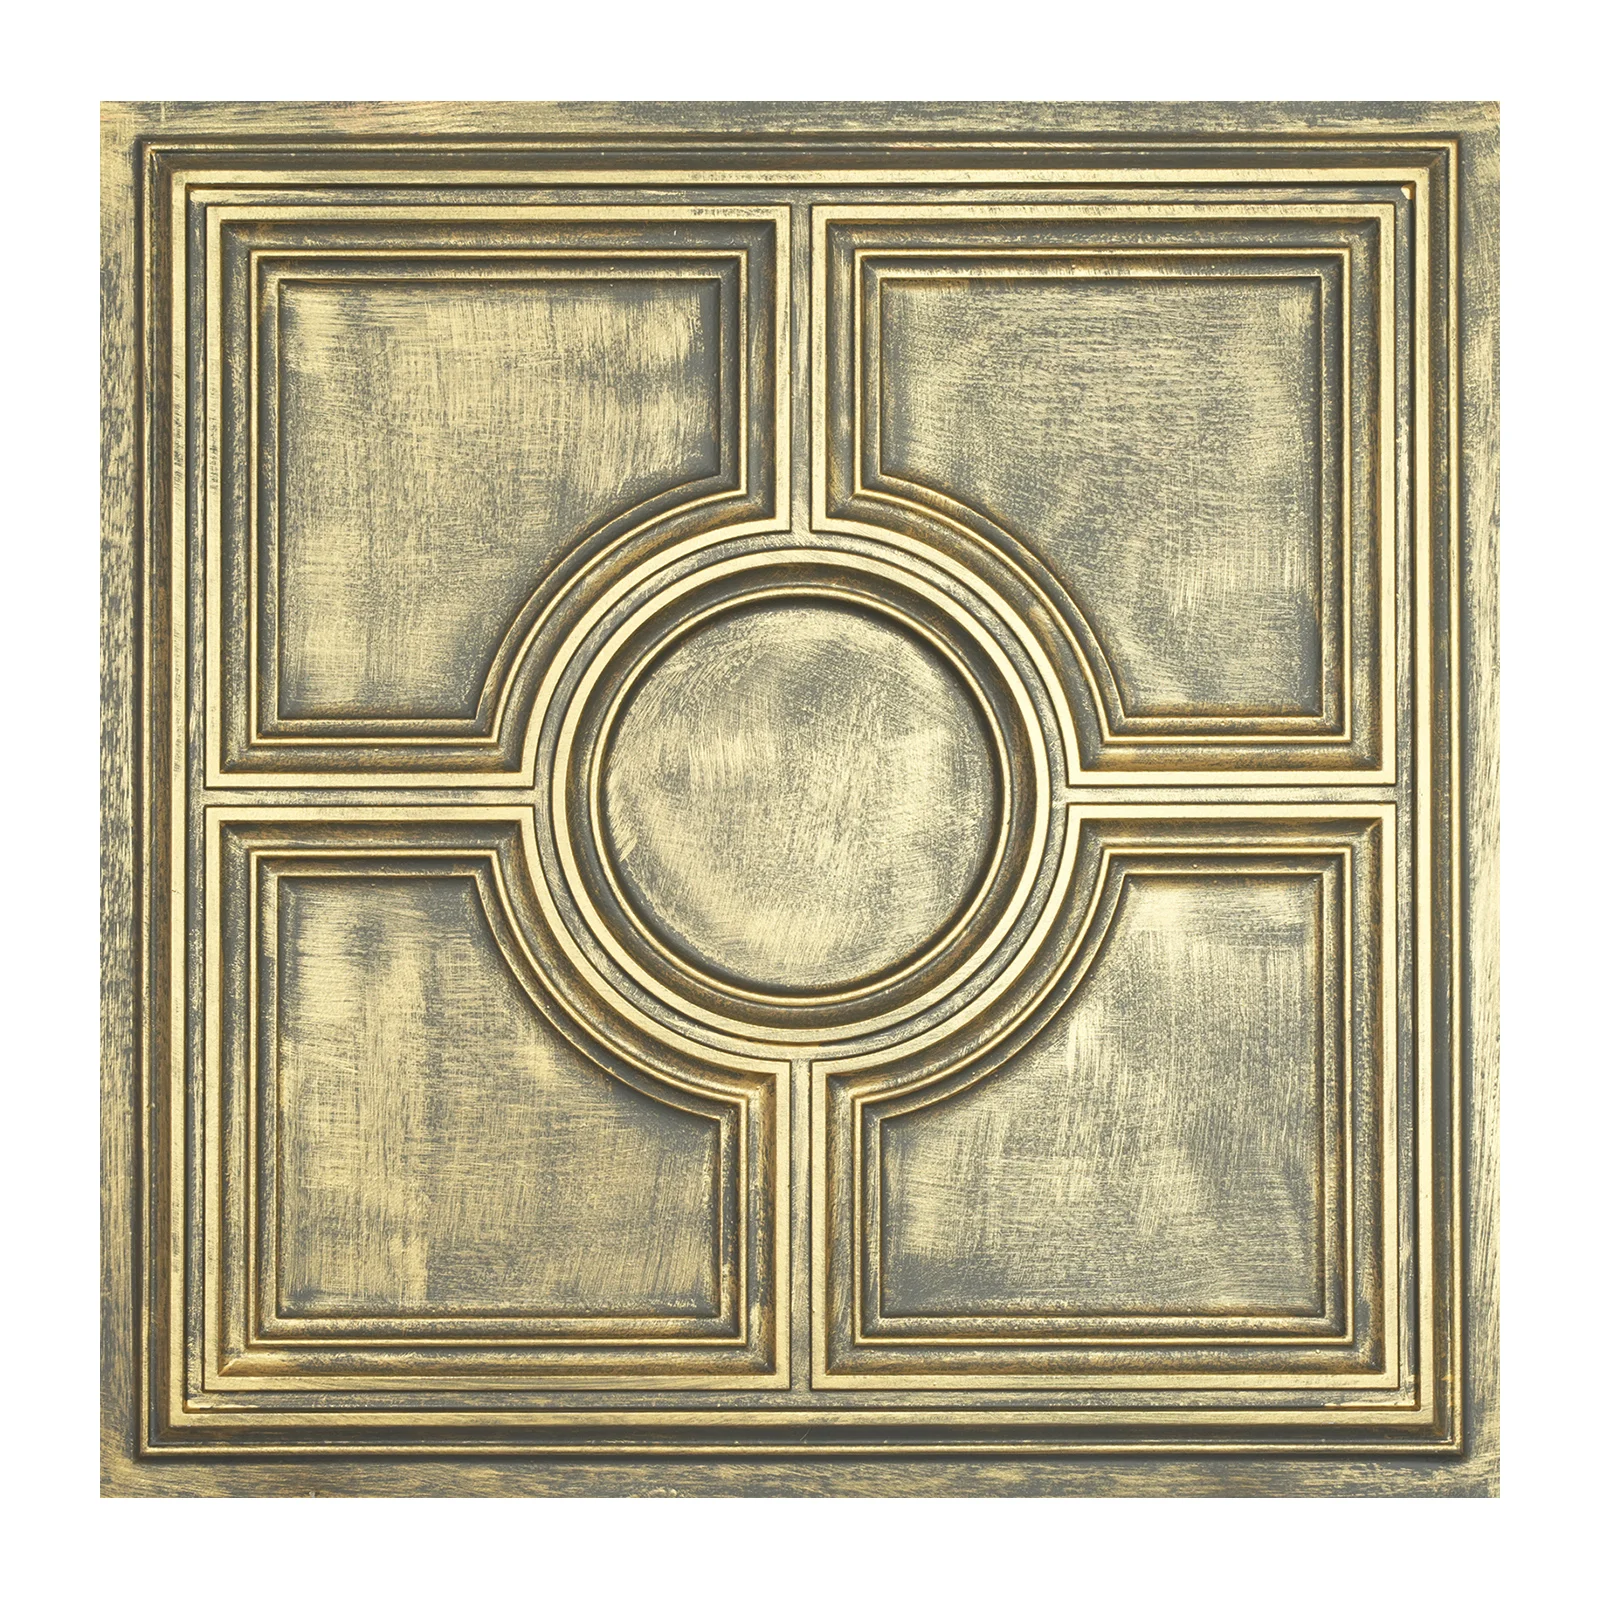 Artistic 3D ceiling tile verdigris patina Architectural wall panels wall decor for Cafe Club HOTEL PL37 Ancient gold